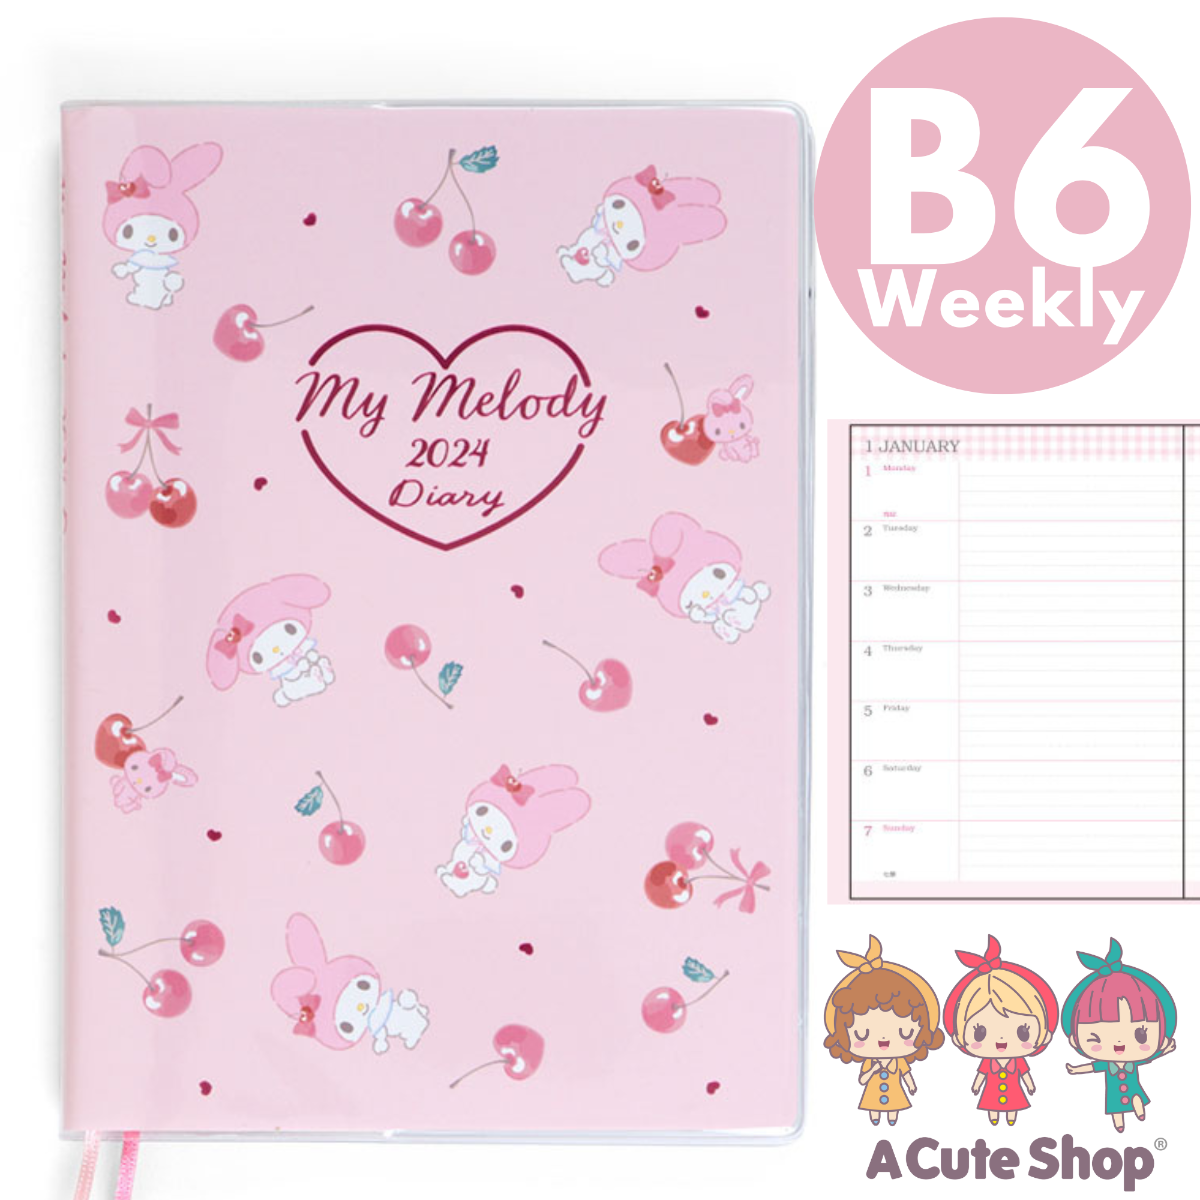 ❤SHIPPING NOW❤2024 My Melody B6 Weekly Planner LINED TYPE Diary Notebook Schedule Book Agenda PINK w/ BONUS GIFT A Cute Shop - Inspired by You For The Cute Soul 